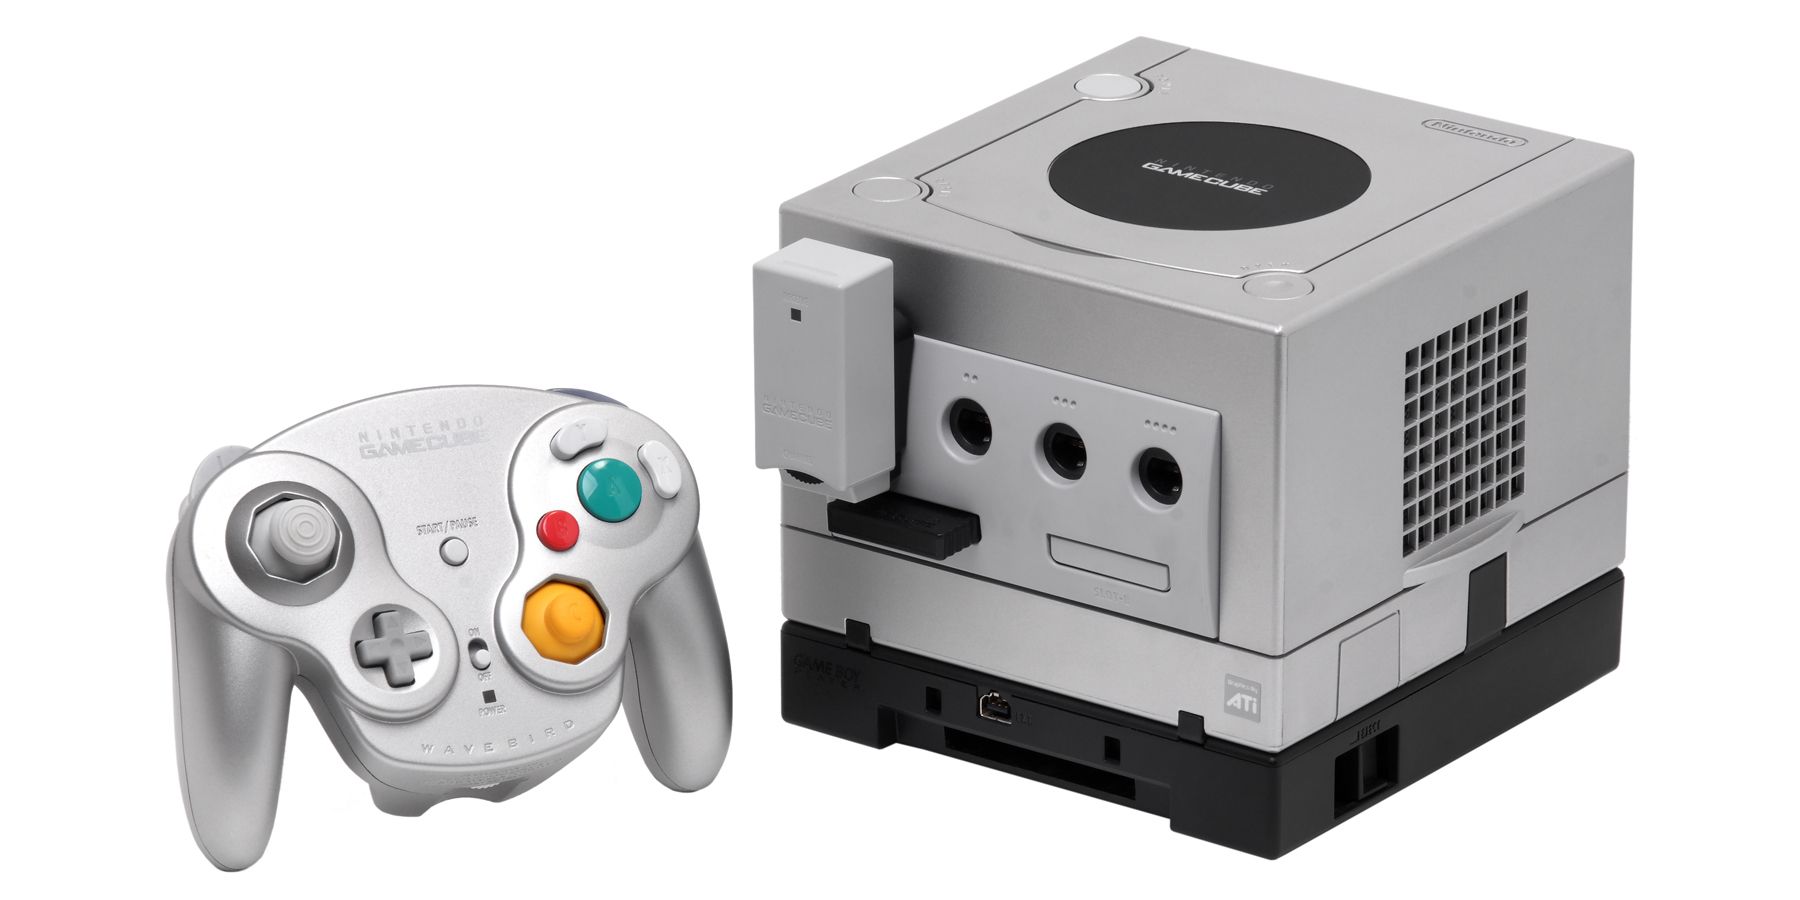 Silver GameCube with wireless wavebird controller